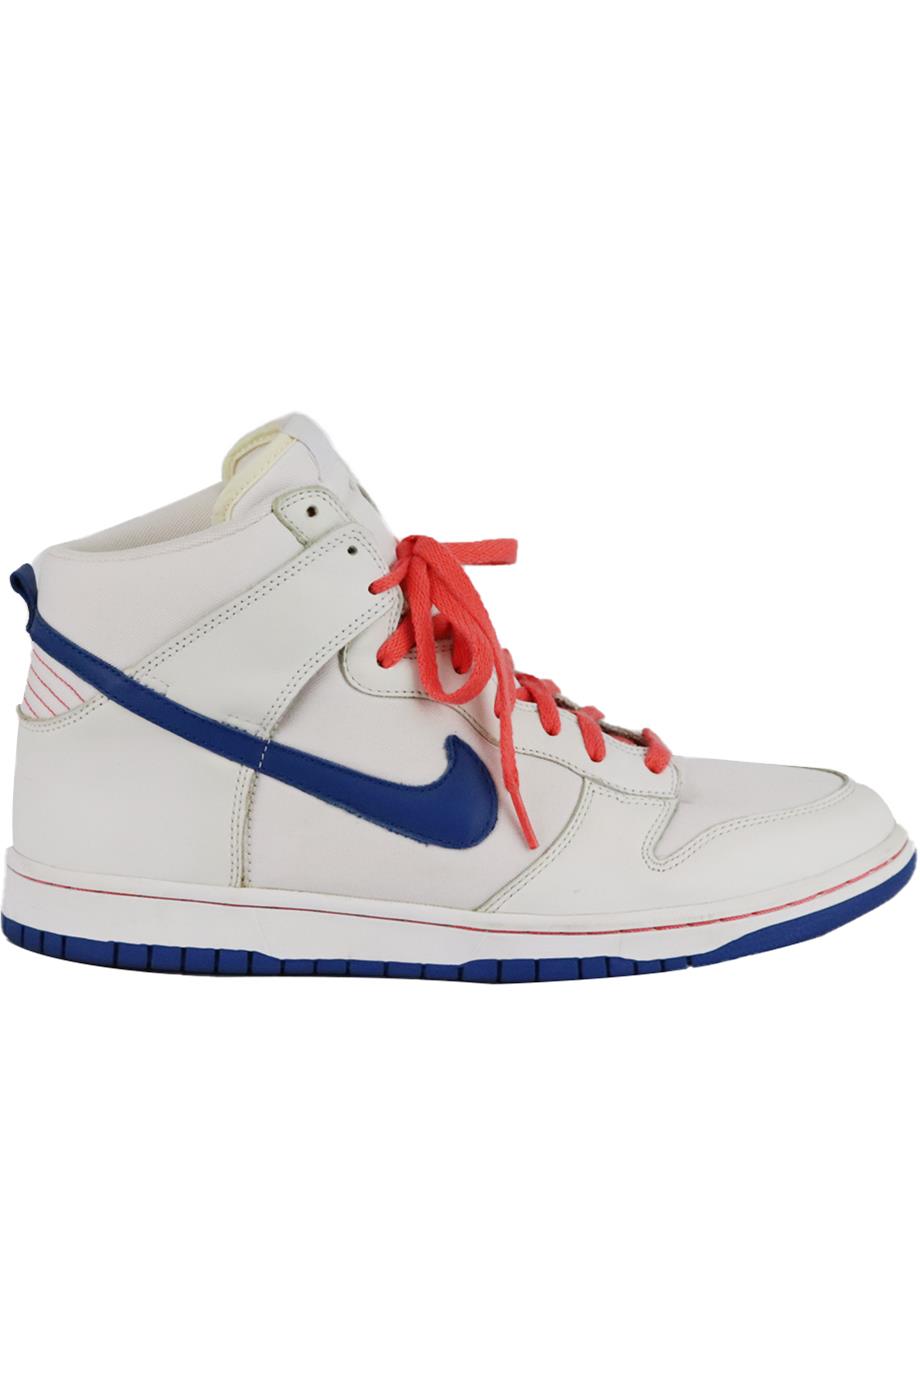 NIKE MEN'S DUNK HIGH TOP MESH AND LEATHER SNEAKERS EU 45.5 UK 10.5 US 11.5